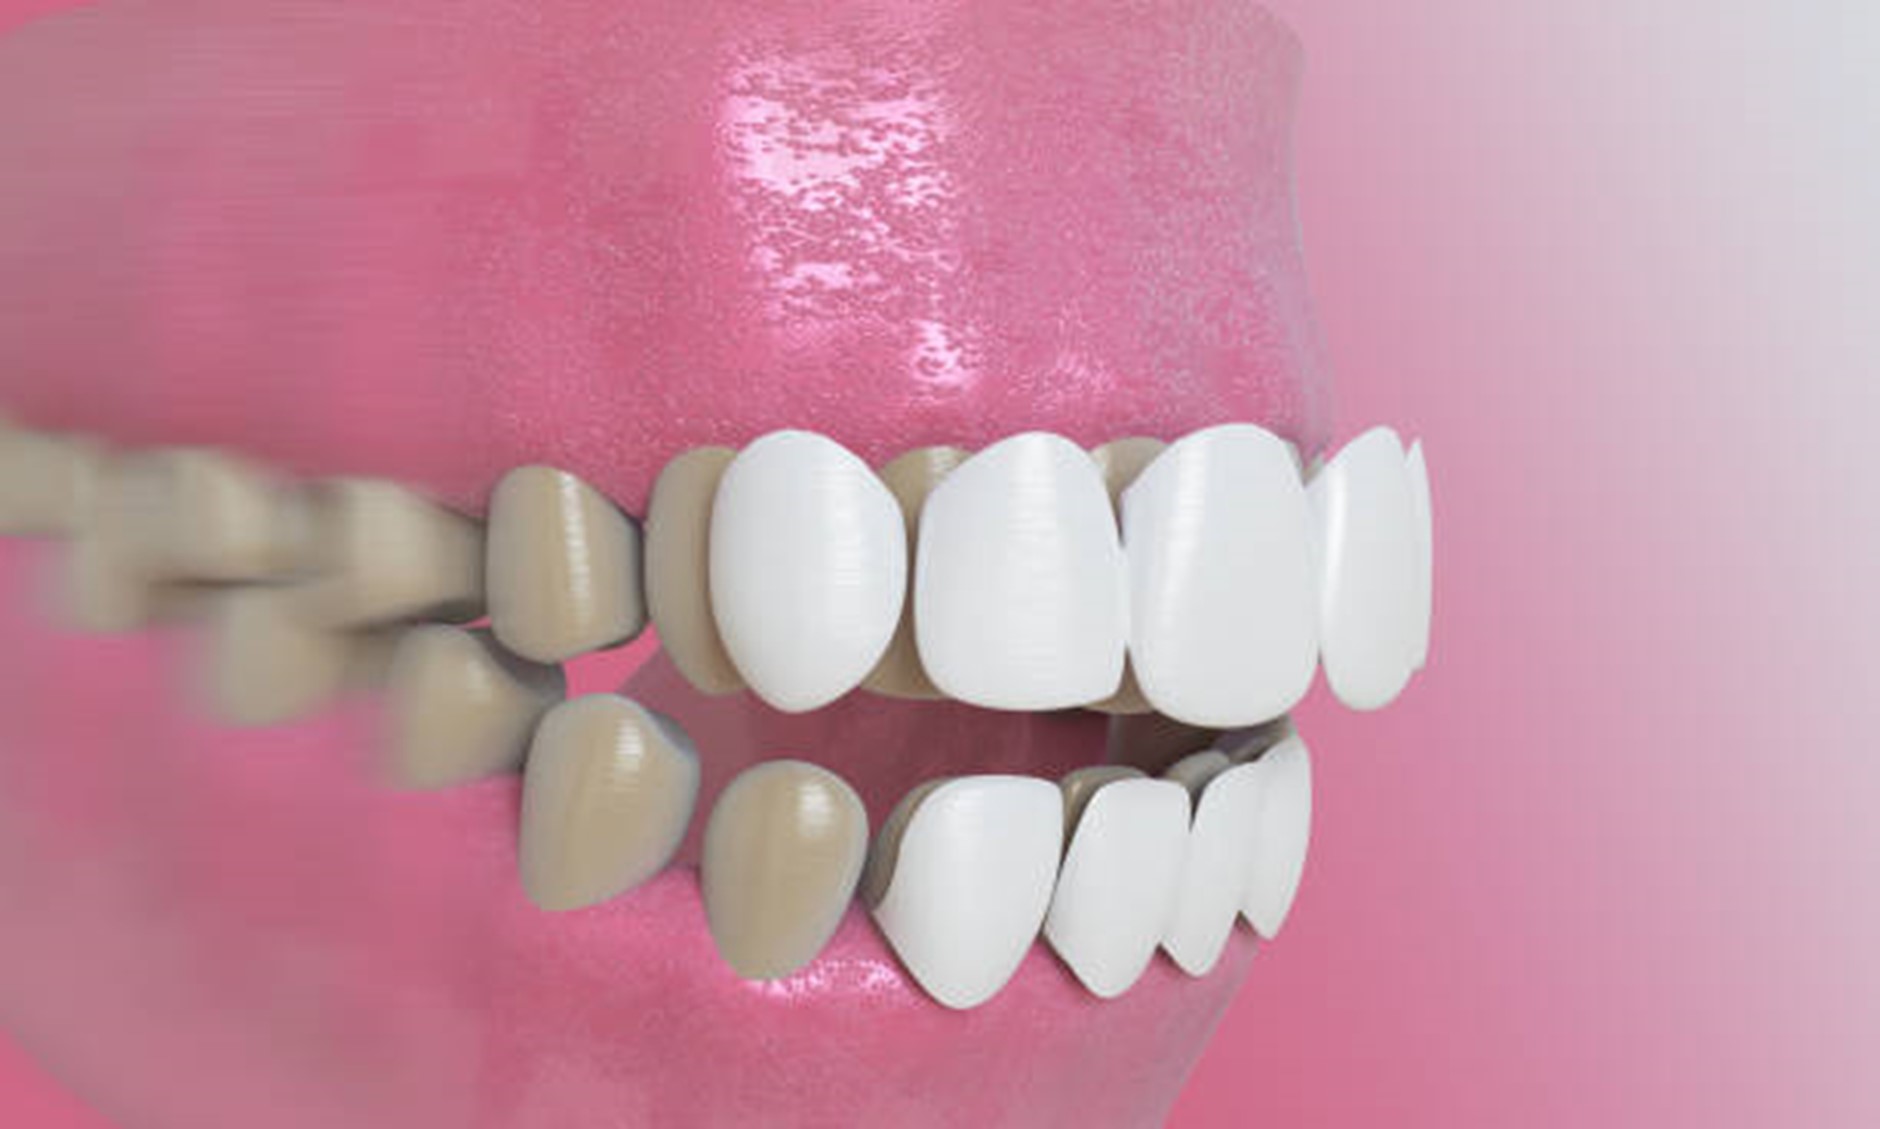 The Art of Natural-Looking Veneers: How Dental Concepts Nails It